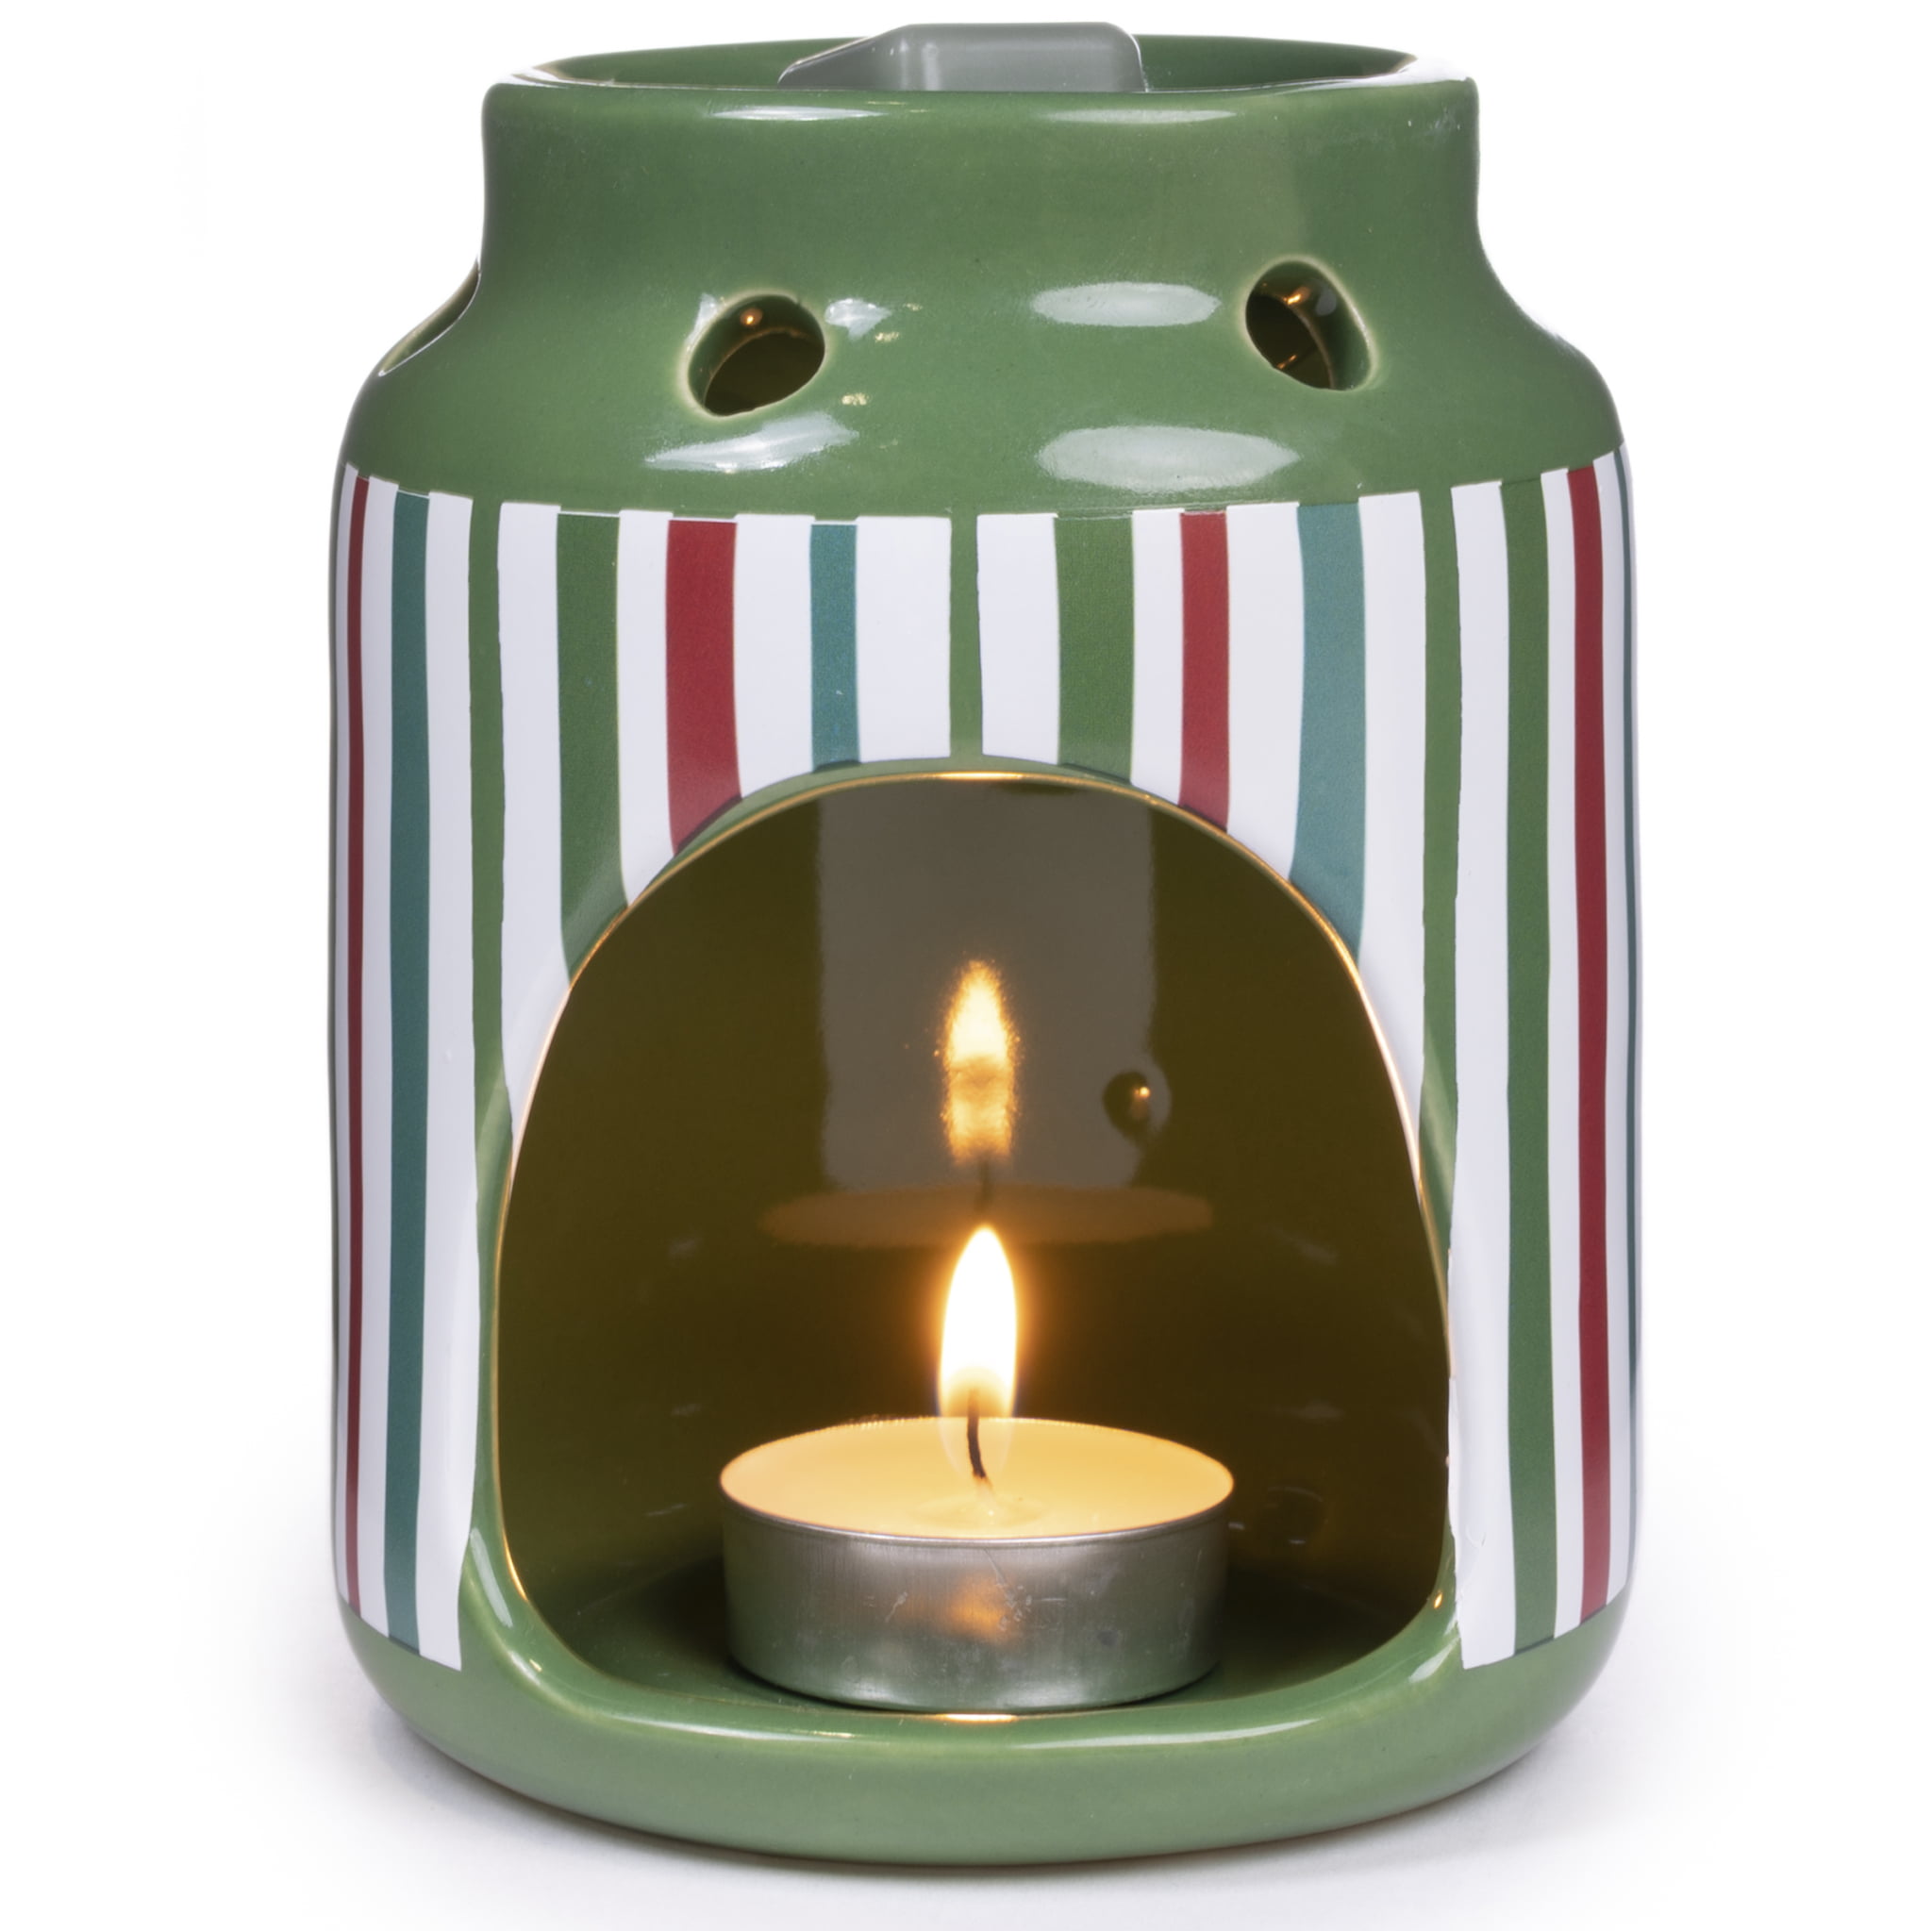 Candle Warmer – Sierra Mountain Candle Co